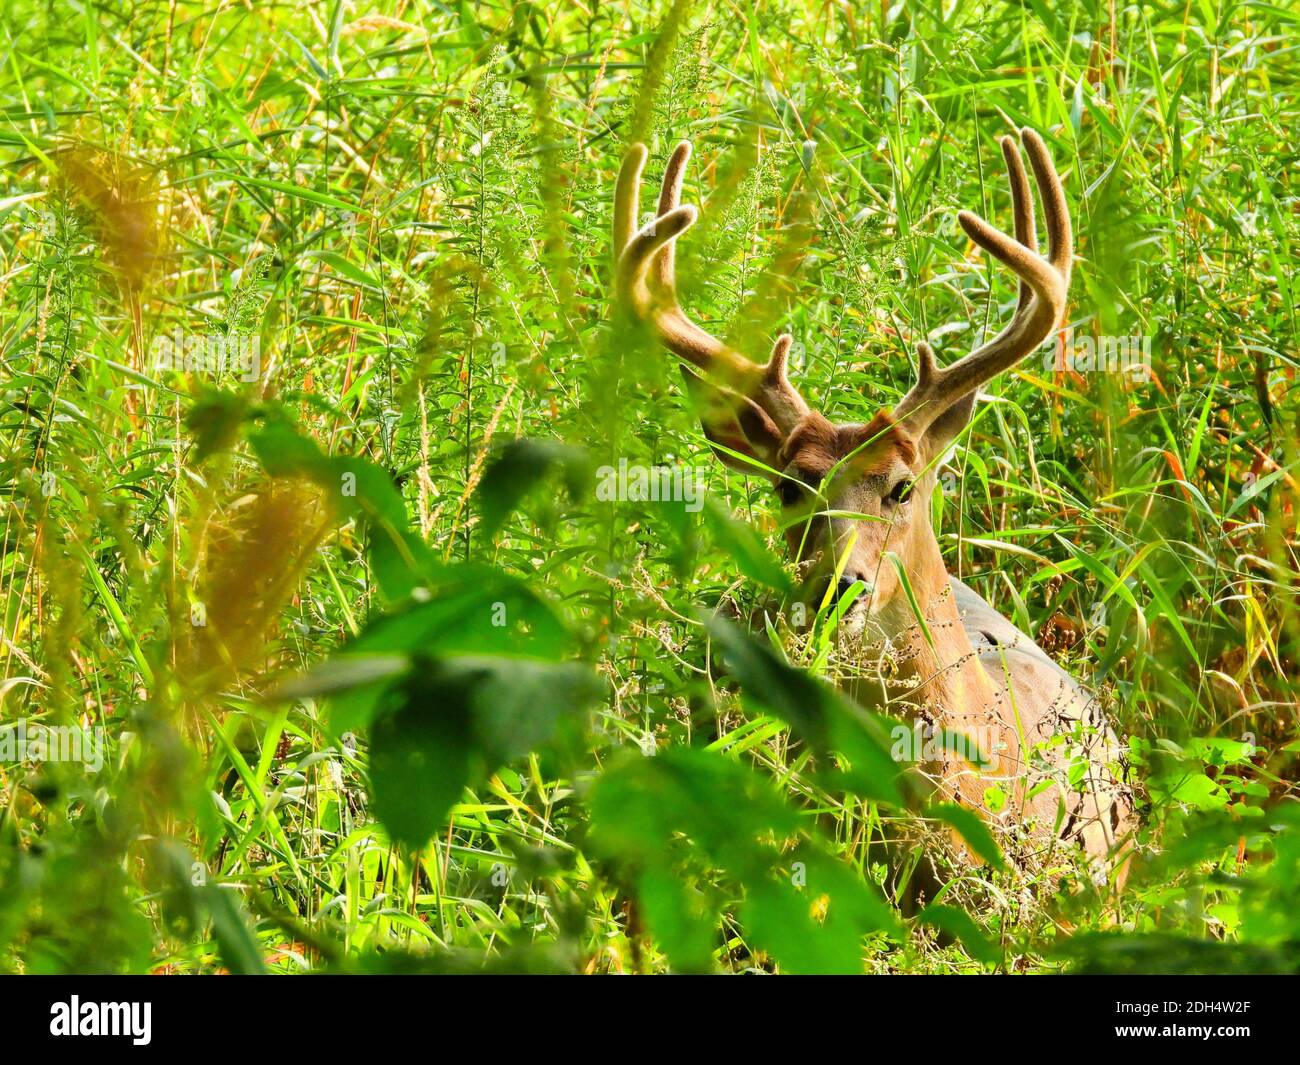 Male Buck White-Tailed Deer with Antlers Covered in Velvet as He Hides Among Bright Green Summer Foliage Stock Photo